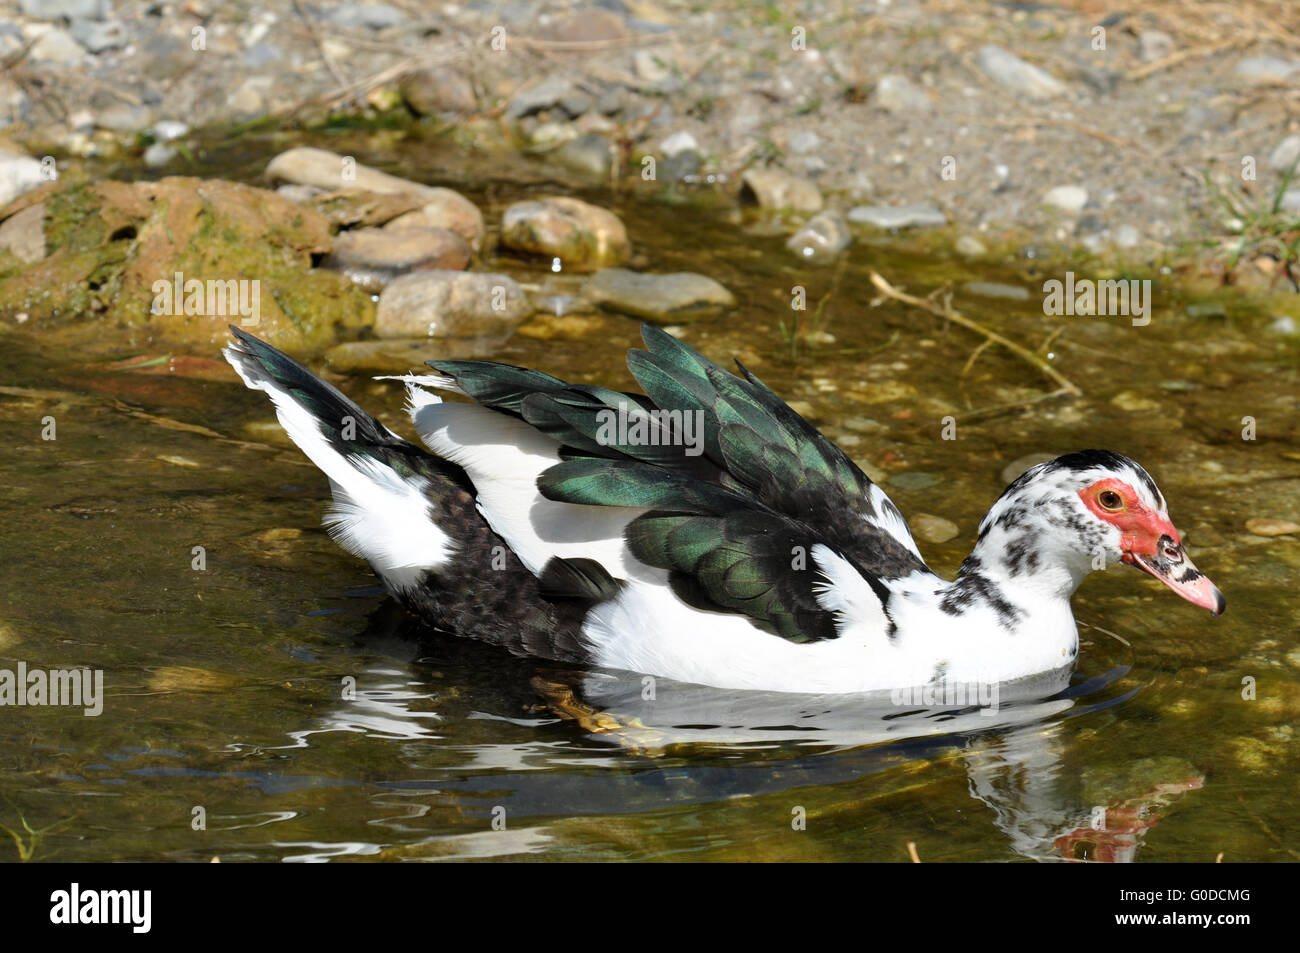 Muscovy Duck Stock Photo